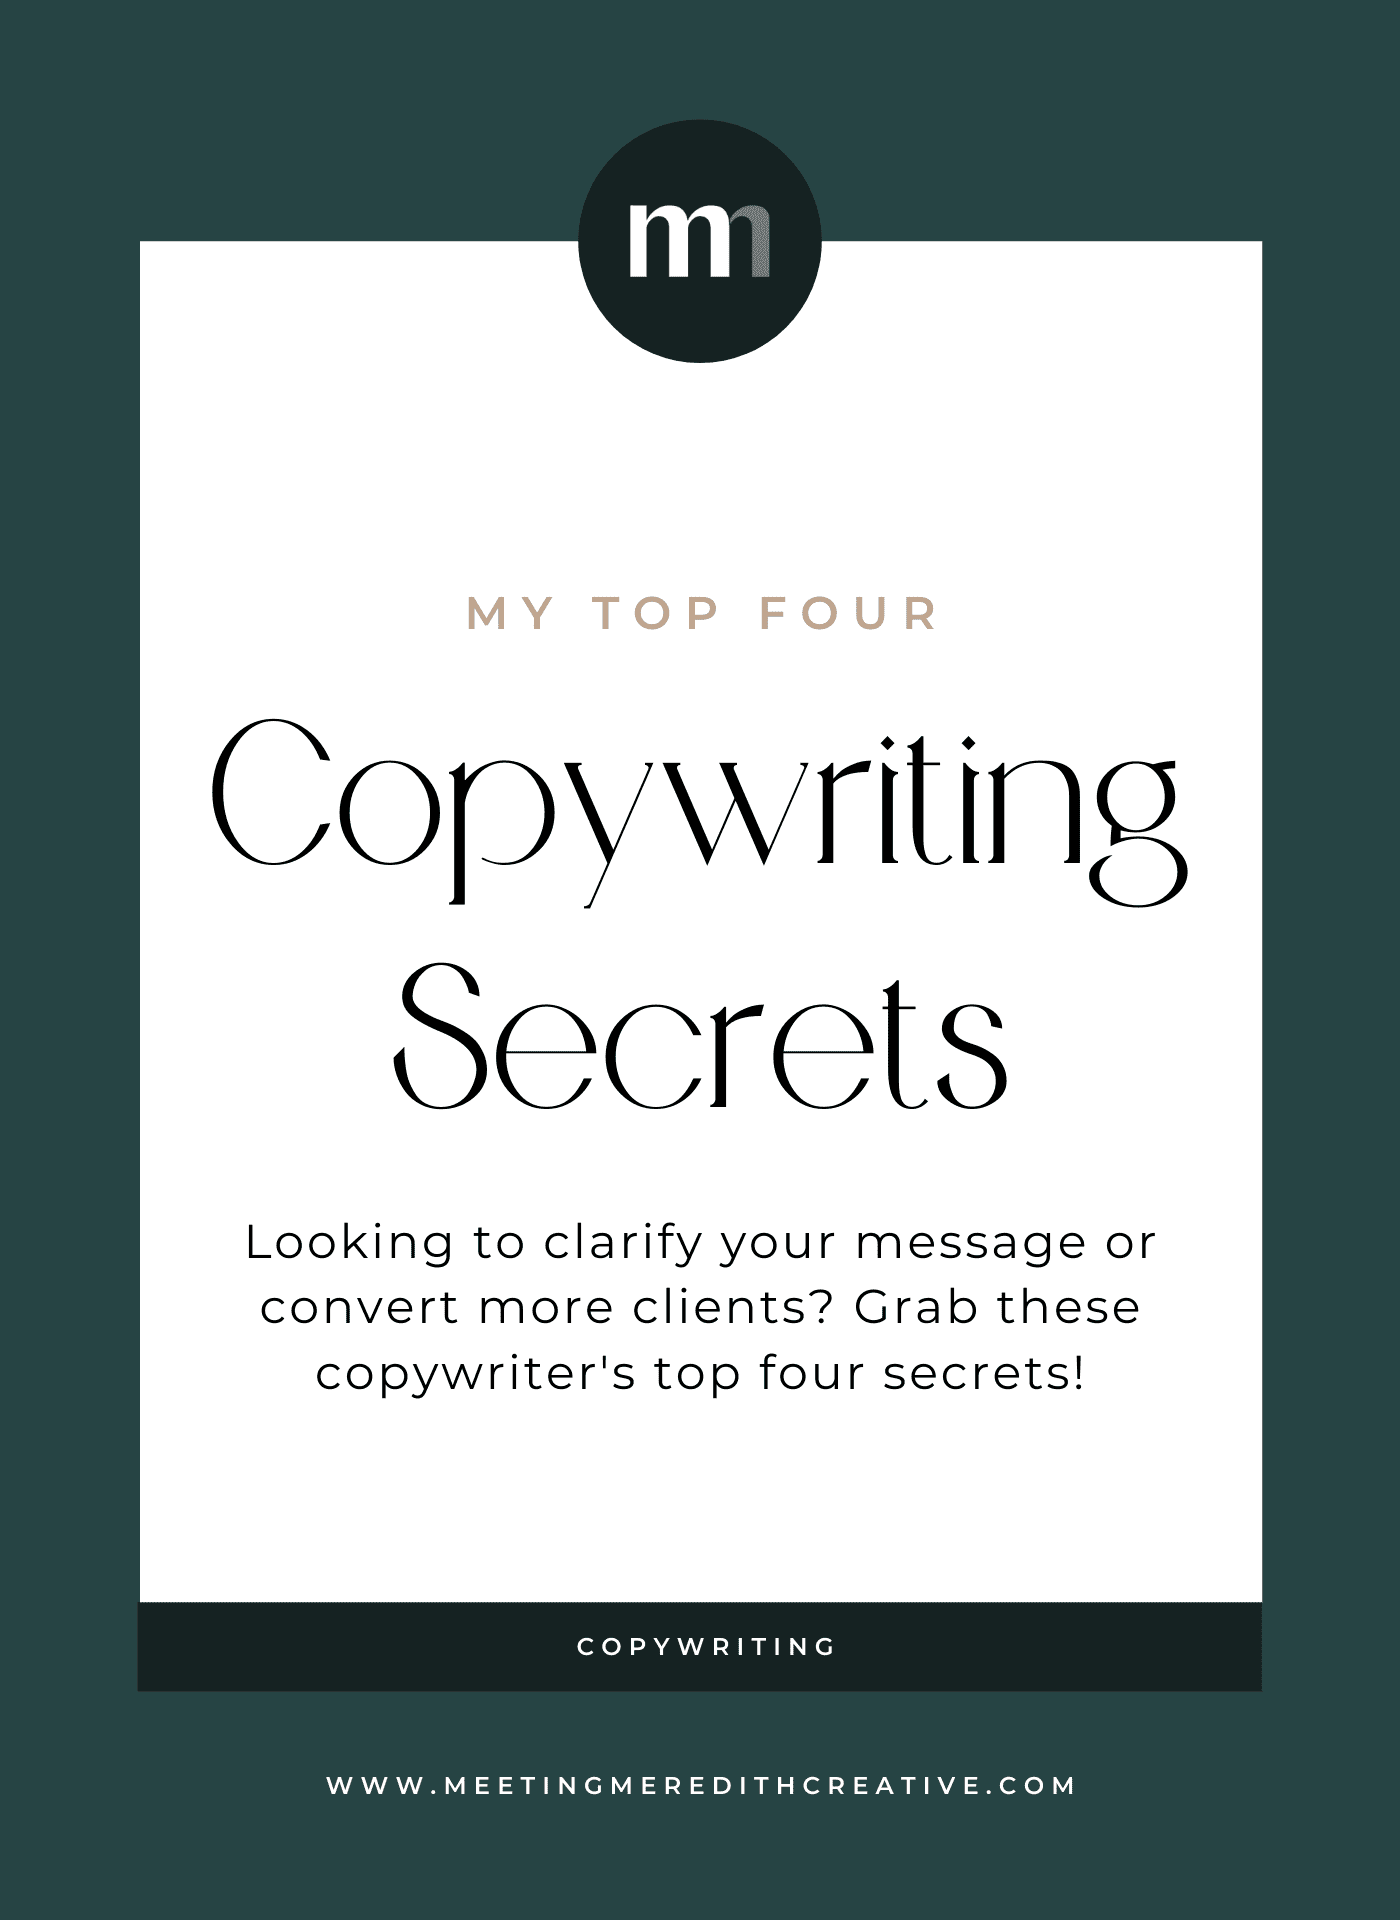 Four Copywriting Secrets from a Professional Copywriter Meeting Meredith Creative